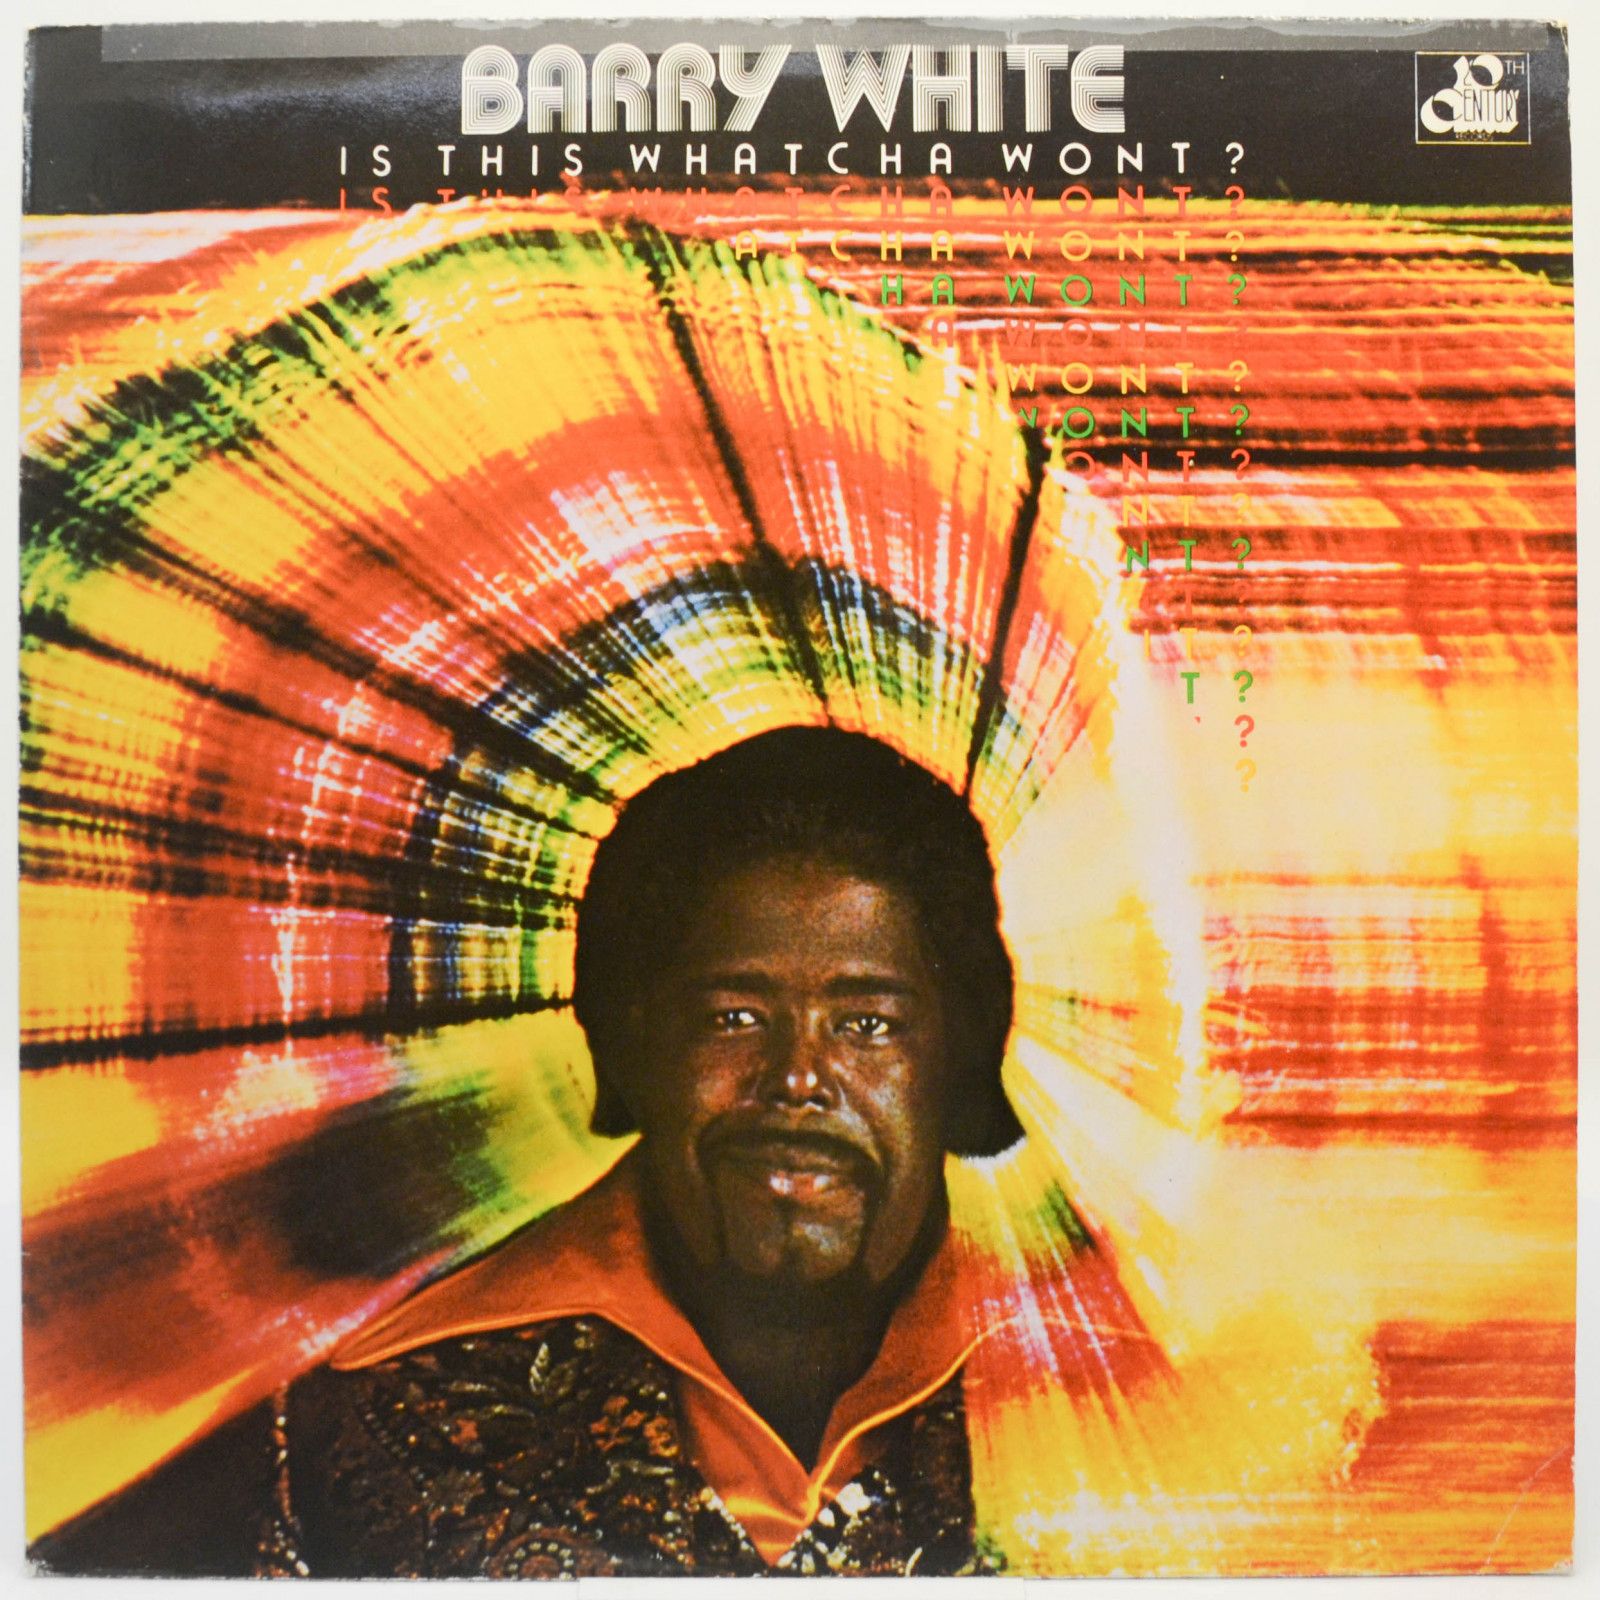 Barry White — Is This Whatcha Wont?, 1976